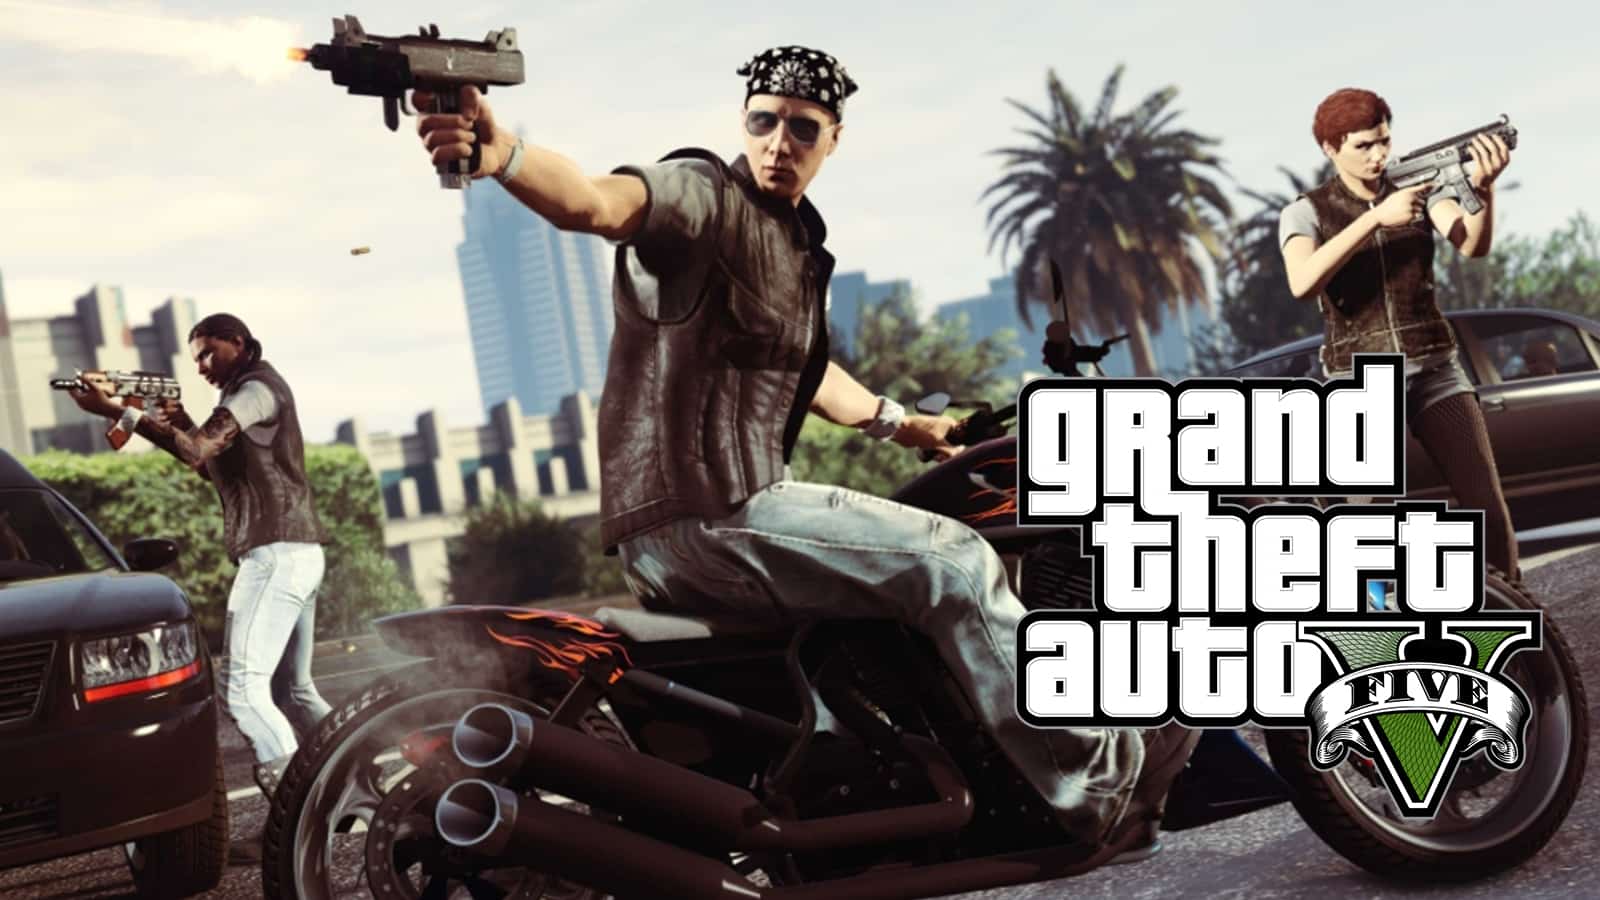 GTA & Red Dead VR Mods Taken Down After Notice From Take-Two